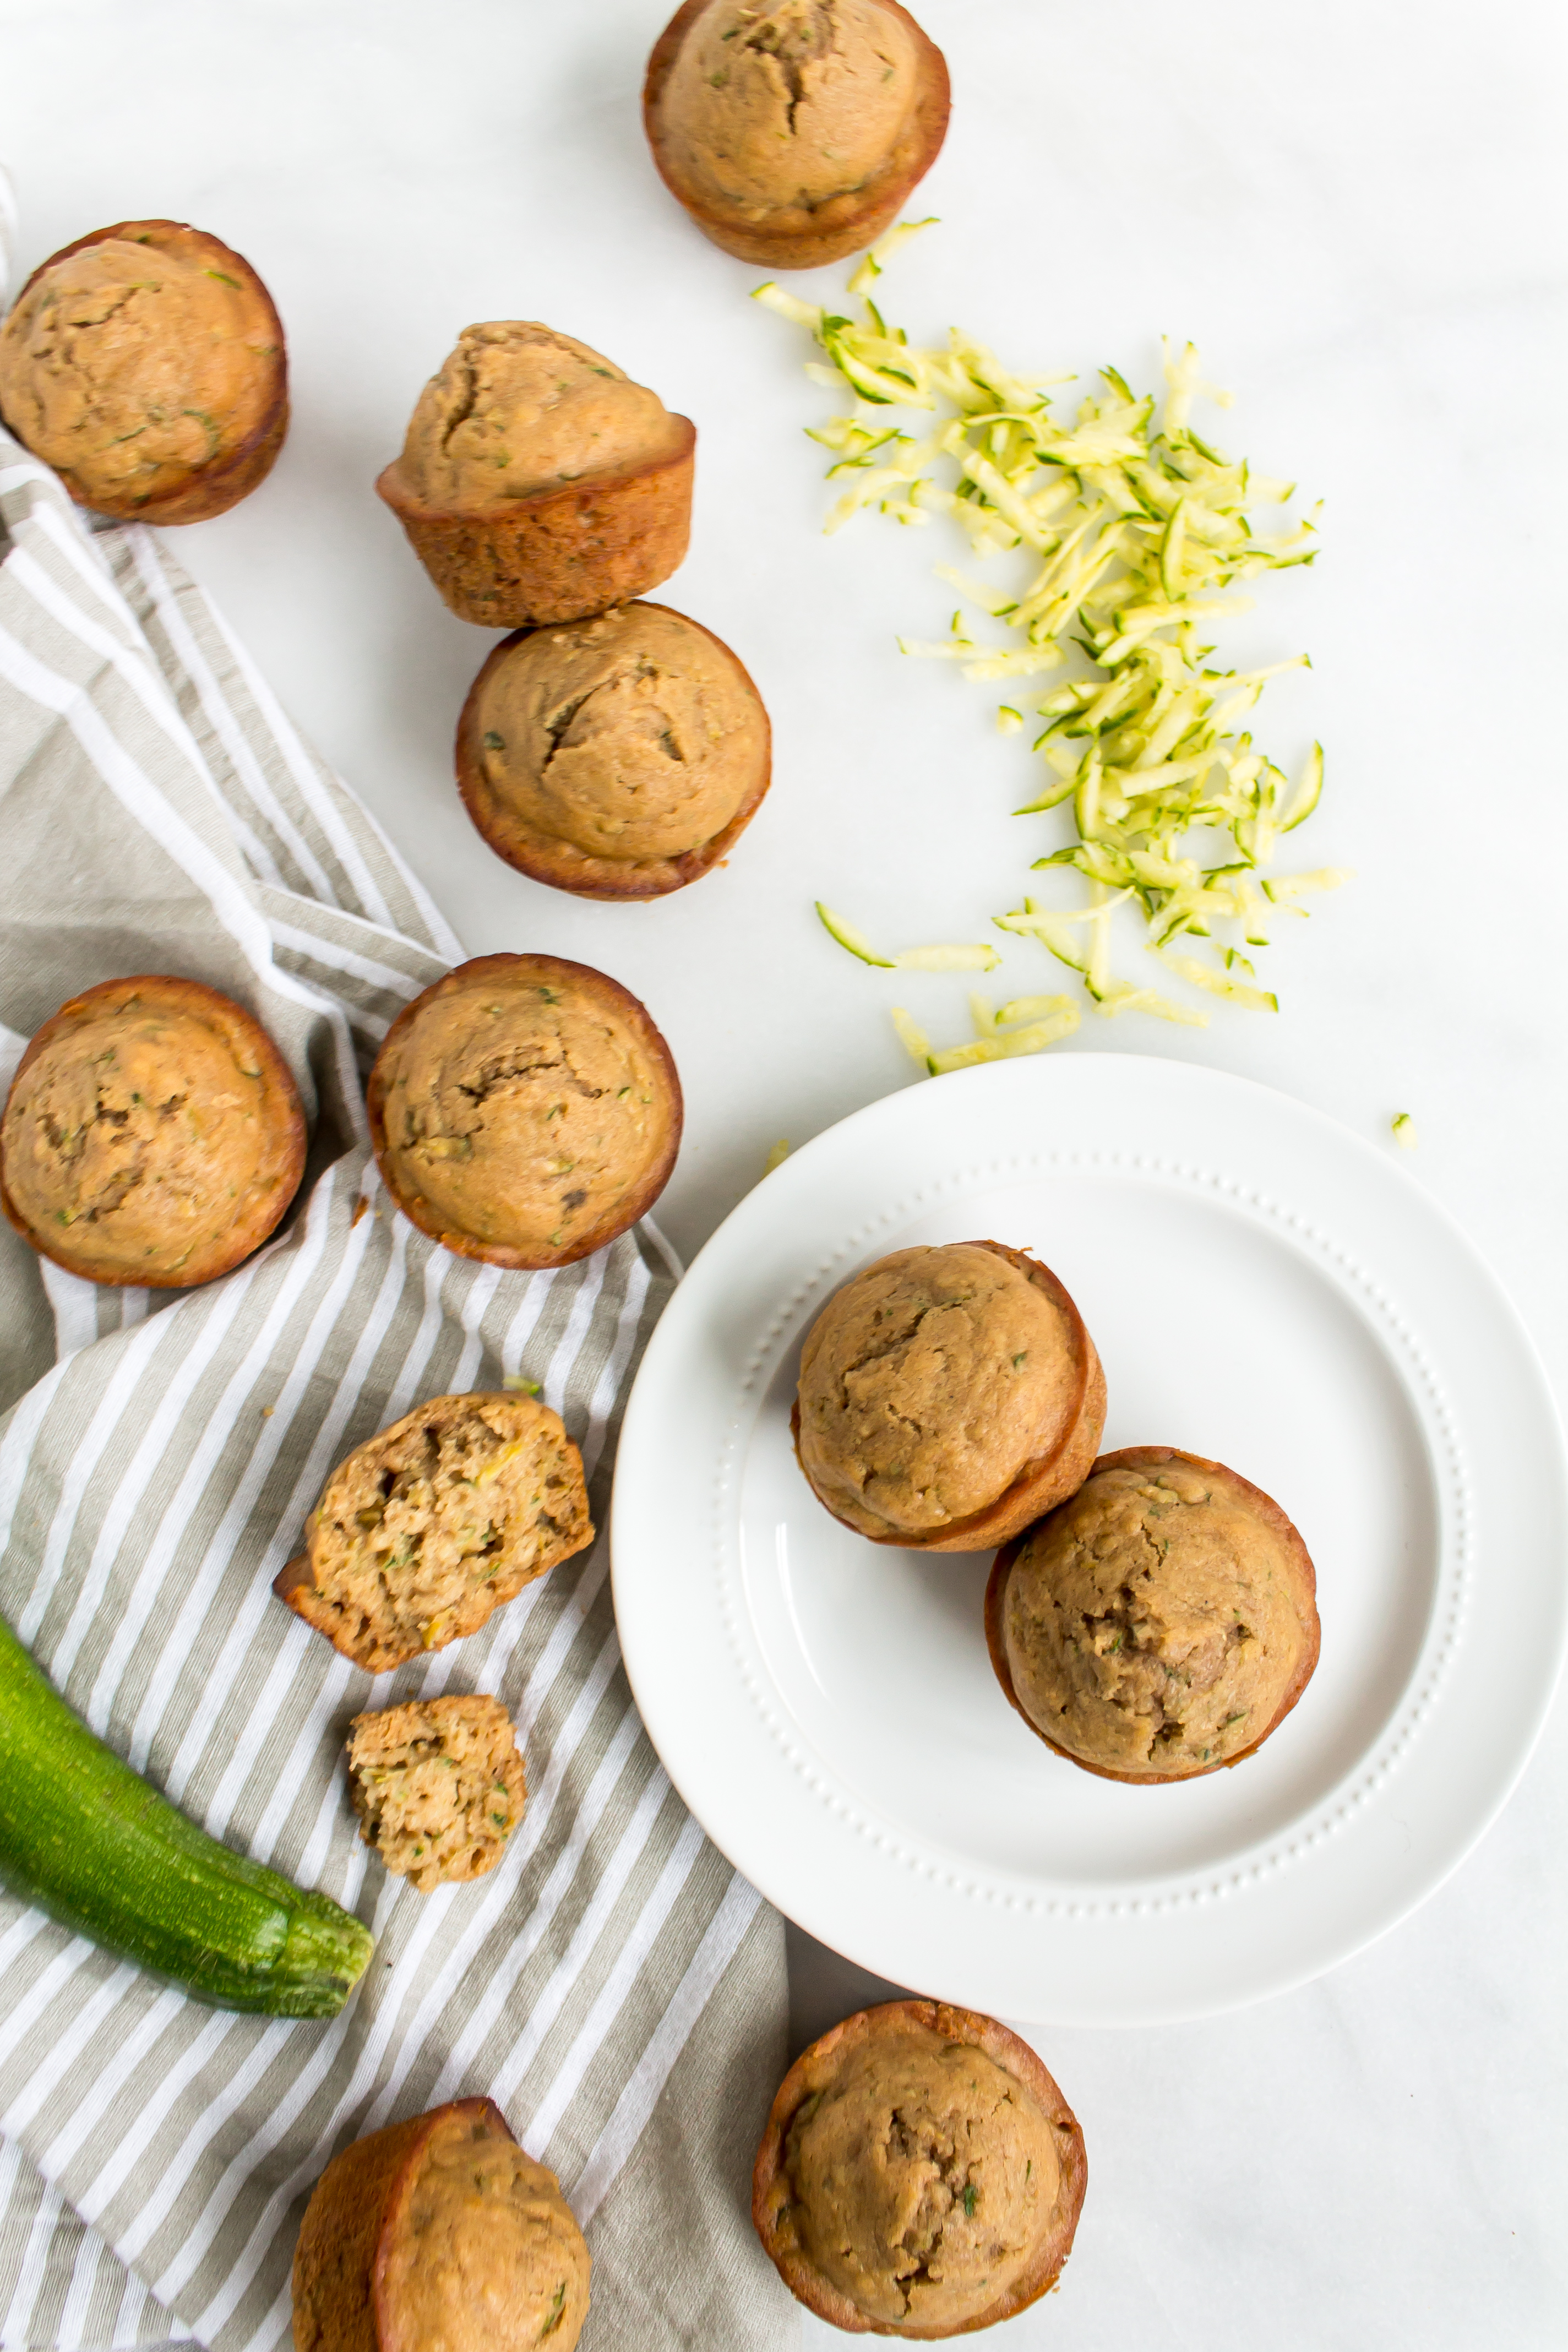 Zucchini muffins that are easy and totally delicious? And healthier too? Look no further! This recipe is for you. | glitterinc.com | @glitterinc - Healthier Zucchini Muffins Recipe by popular North Carolina foodie blog Glitter, Inc.